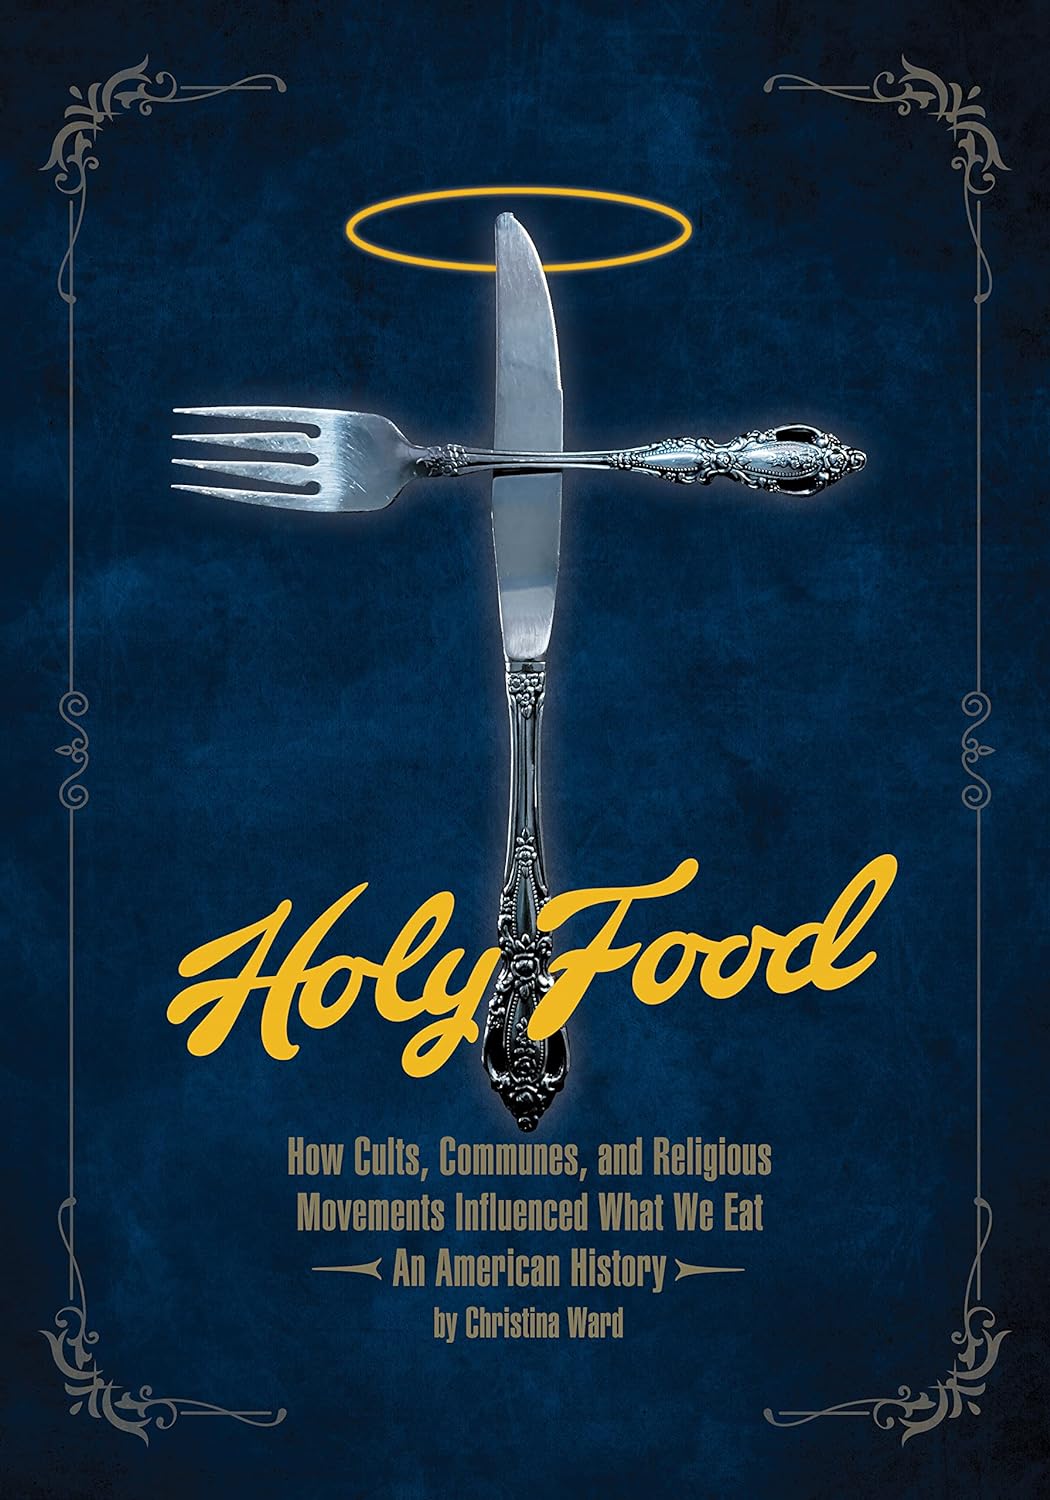 Holy Food: How Cults, Communes, and Religious Movements Influenced What We Eat ― An American History (Christina Ward)